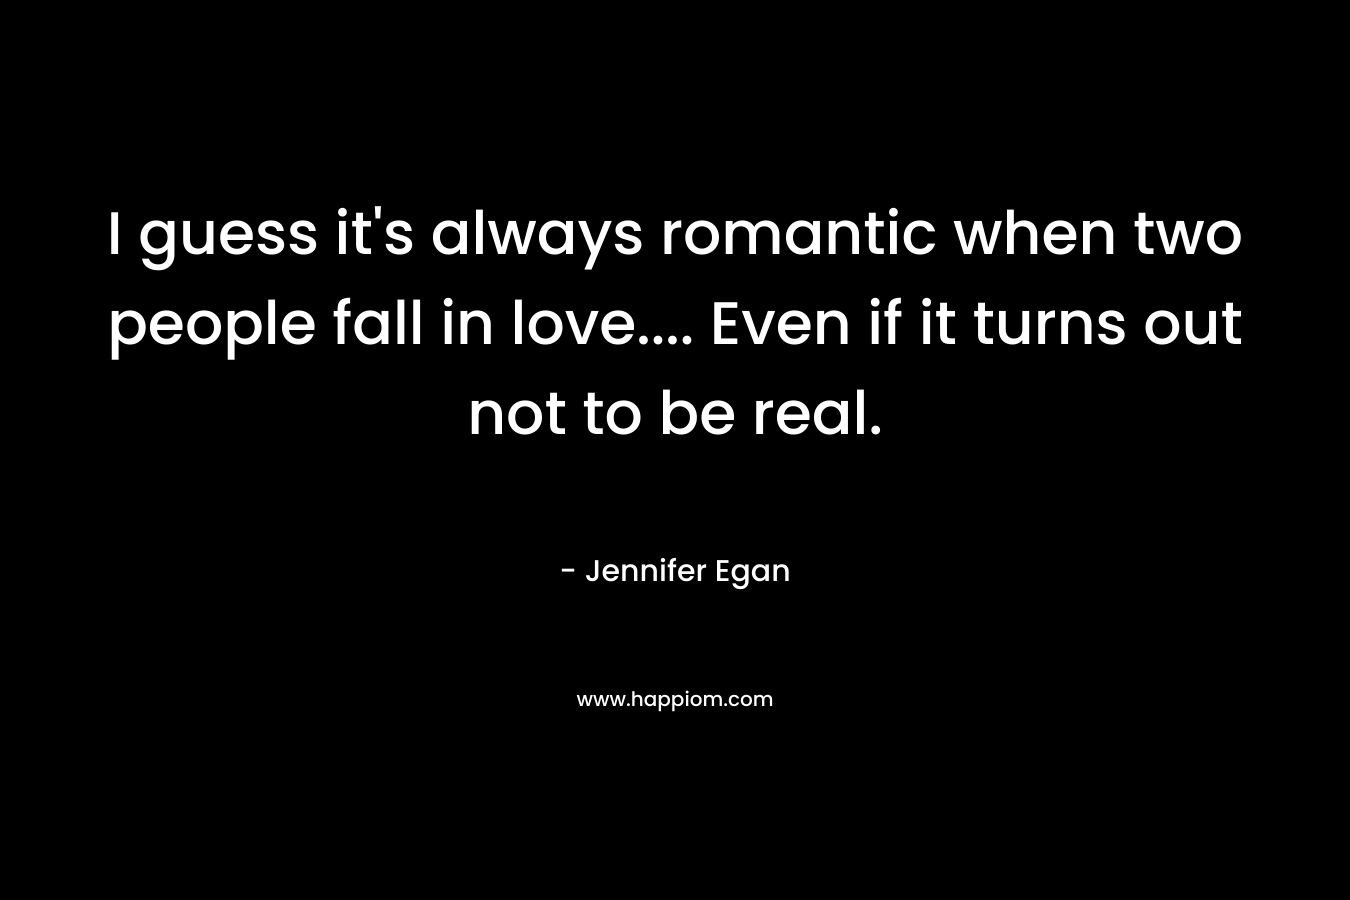 I guess it's always romantic when two people fall in love.... Even if it turns out not to be real.